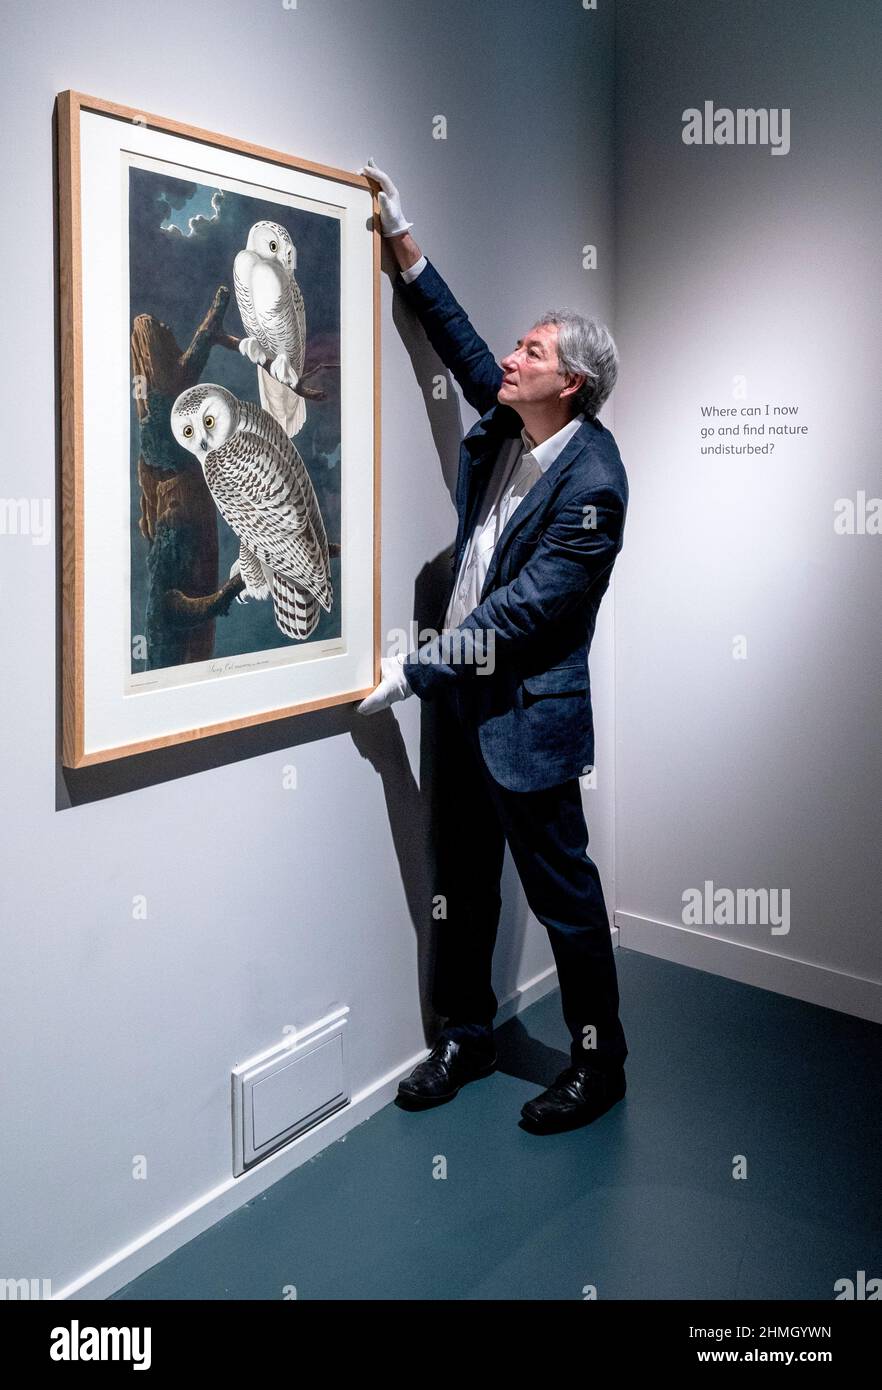 Exhibitions Curator Mark Glancy inspects a Plate 121 that features a Snowy Owl study during the press view for Audubon's Birds of America exhibition at the National Museum Of Scotland, Edinburgh, which will showcase 46 unbound prints from National Museums Scotland's collection, most of which have never been on display before, as well as a rare bound volume of the book, on loan from the Mitchell Library. Birds of America by John James Audubon was published as a series between 1827 and 1838. Picture date: Thursday February 10, 2022. Stock Photo